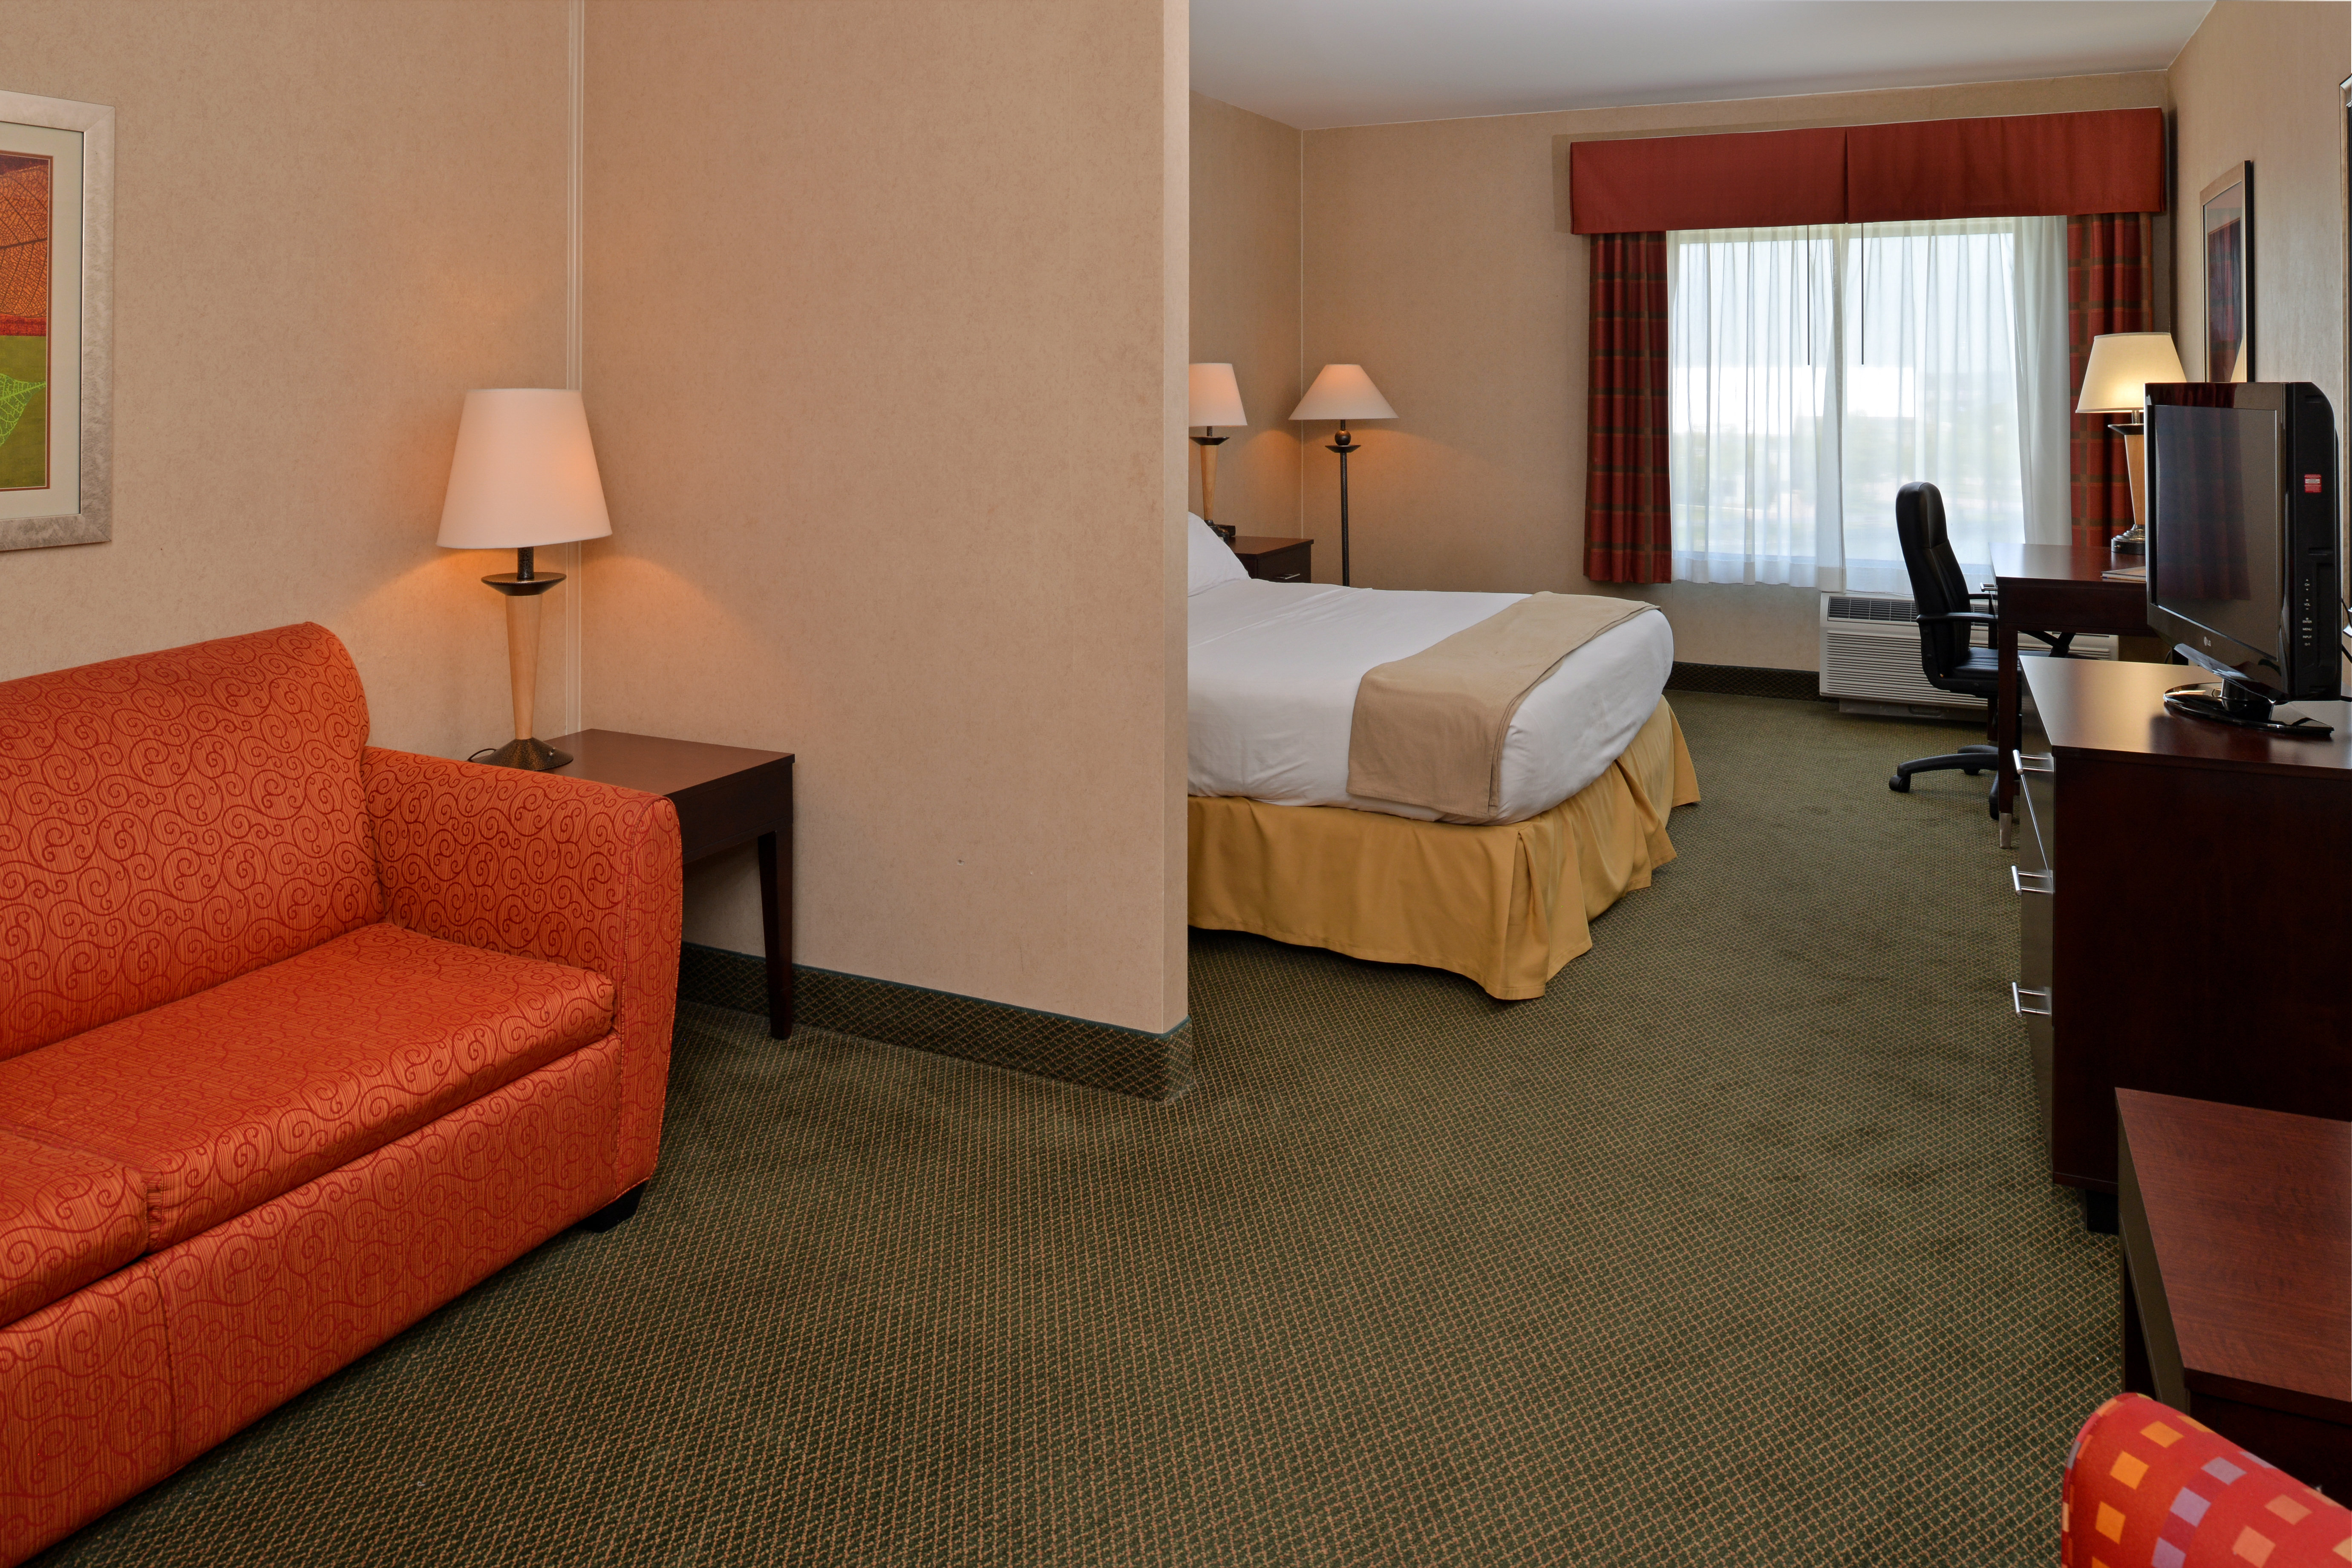 Enjoy your stay in our spacious one room suite with a king bed